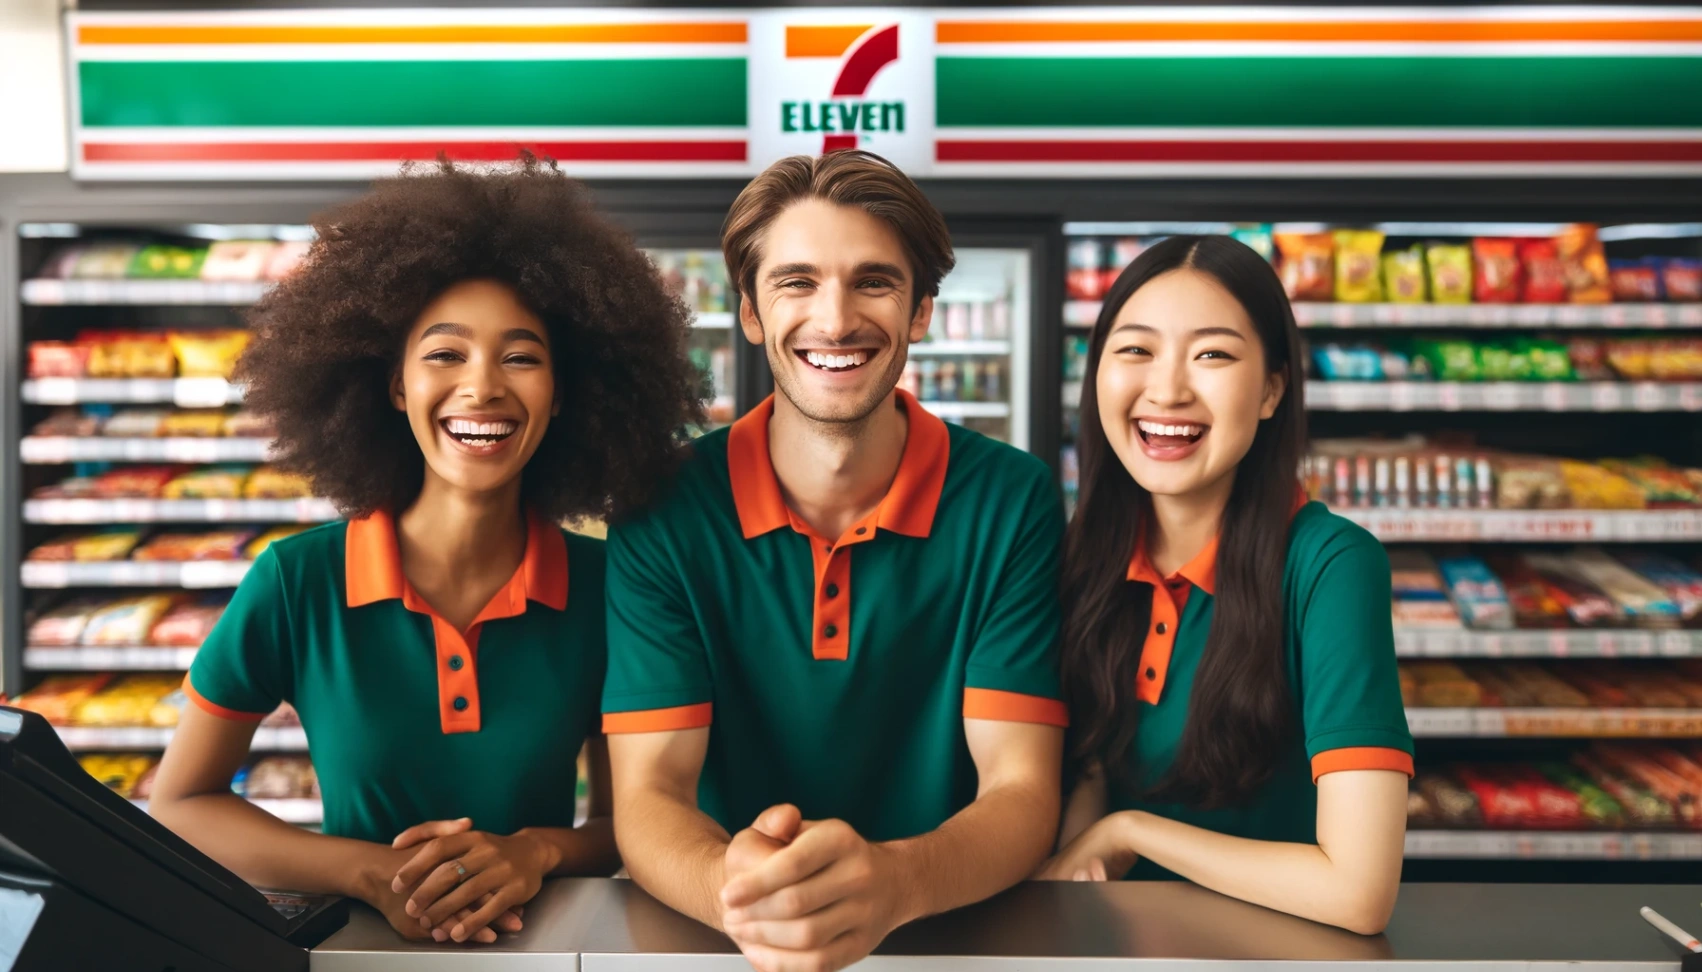 Jobs at 7-Eleven: Learn how to apply